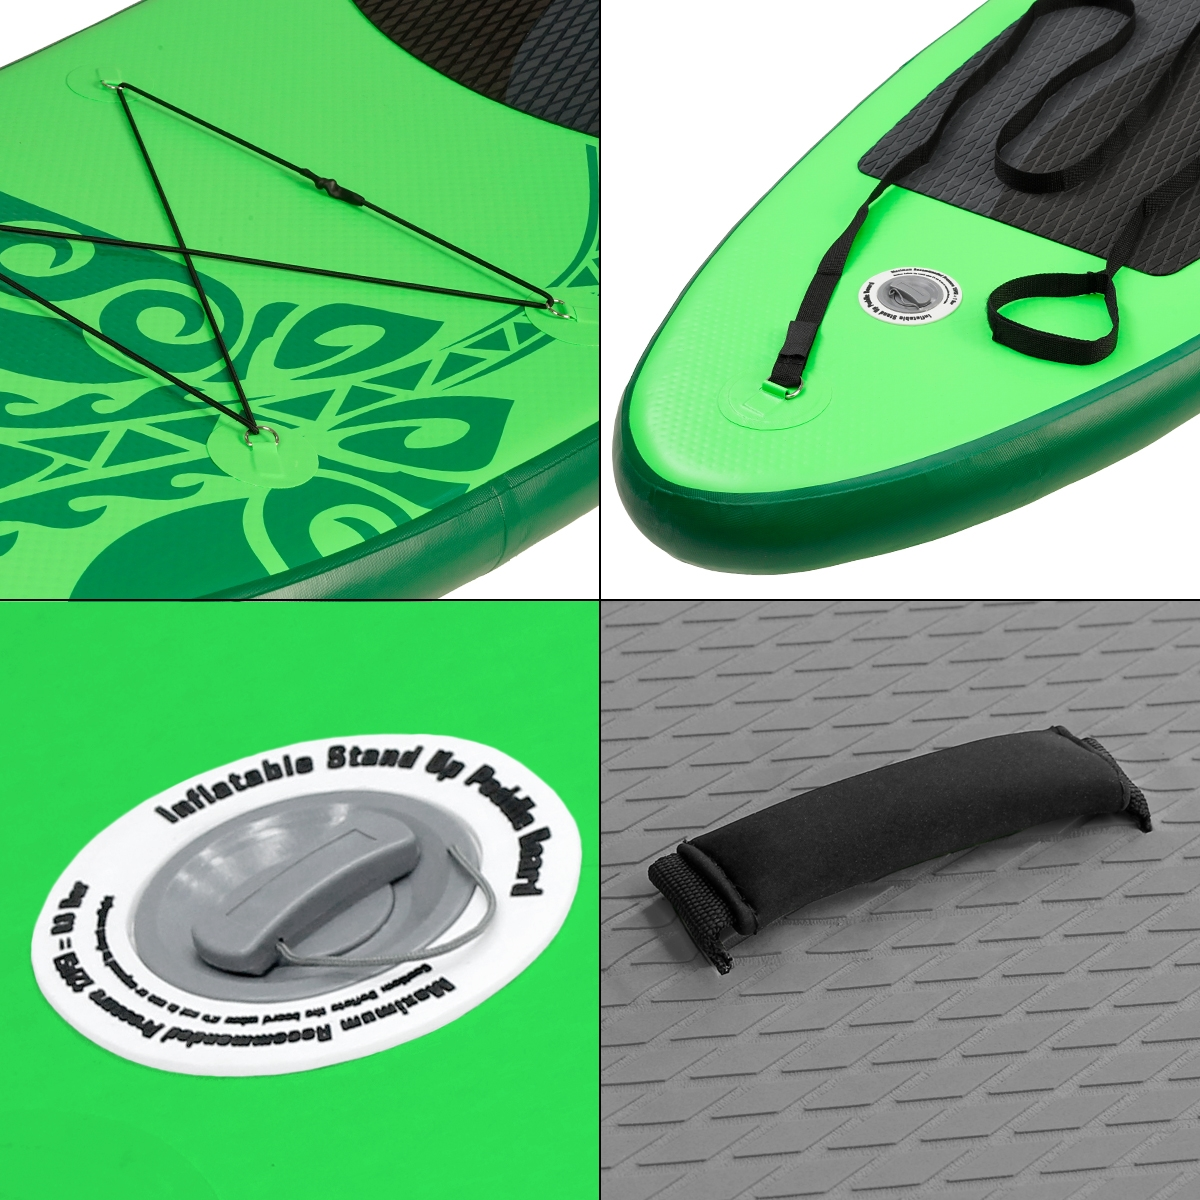 ECD-GERMANY Aufblasbares Stand Up Stand Green Paddle, Board Up Paddle